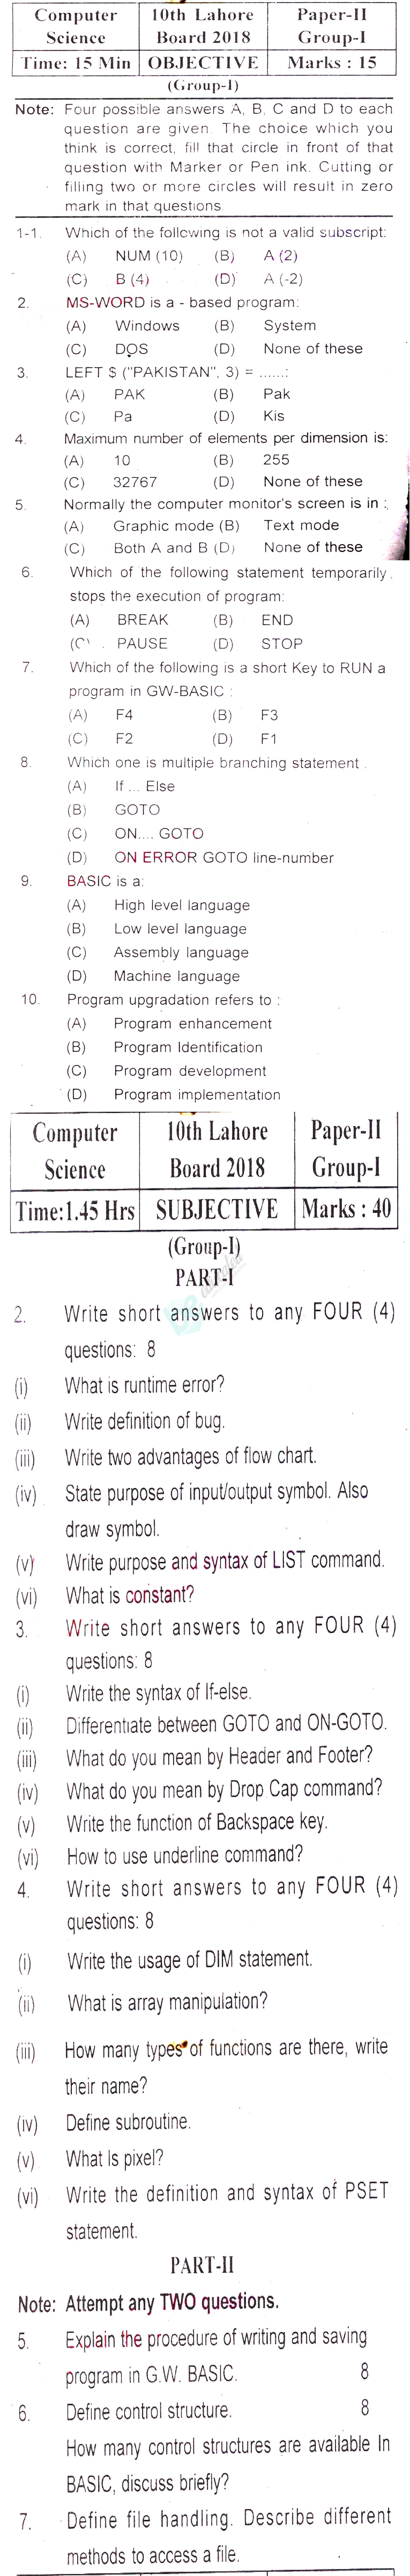 Computer Science 10th English Medium Past Paper Group 1 BISE Lahore 2018